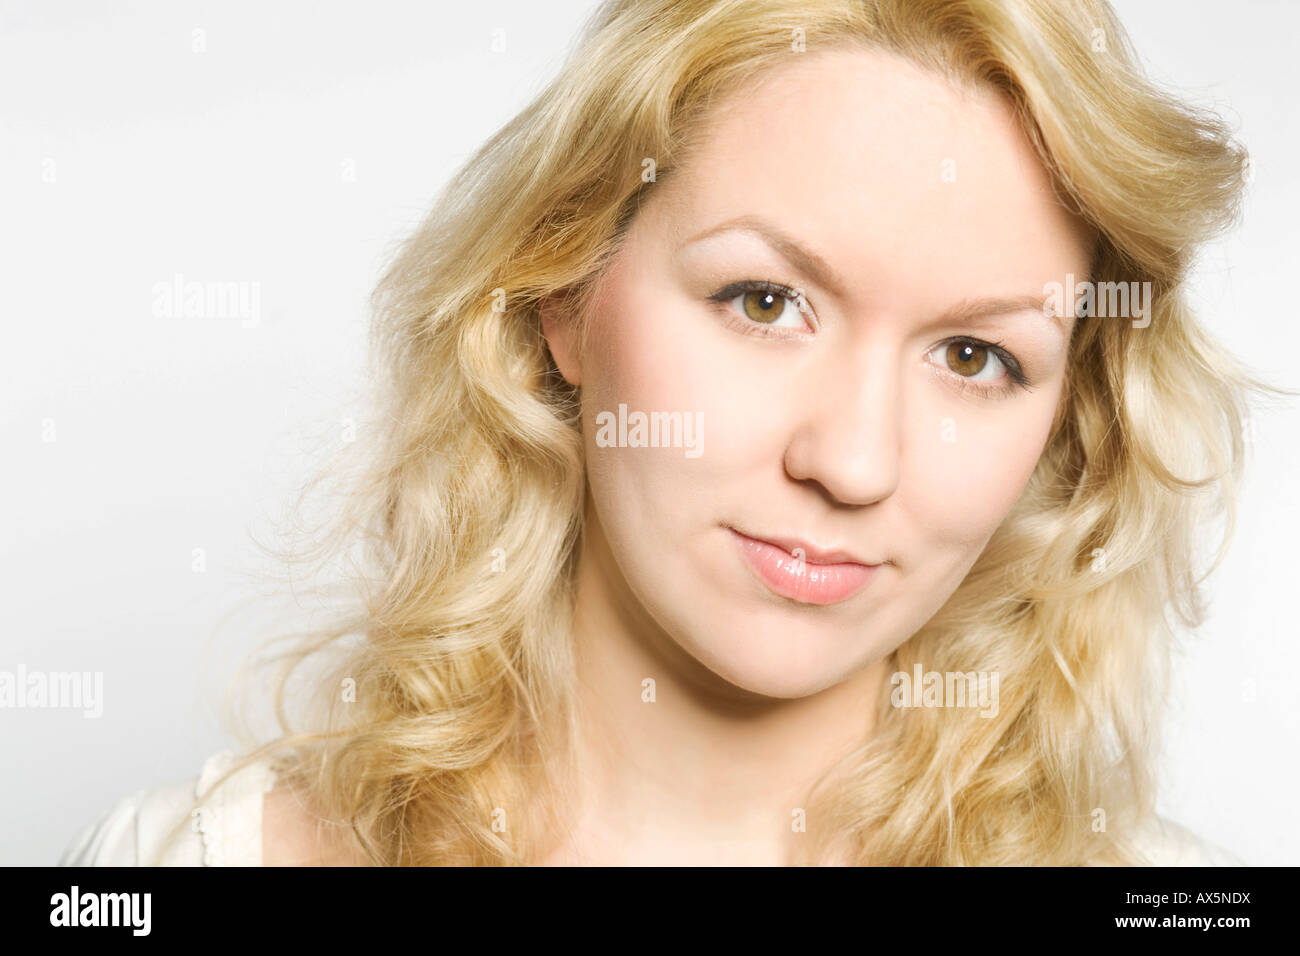 Portrait of a young blonde woman Stock Photo